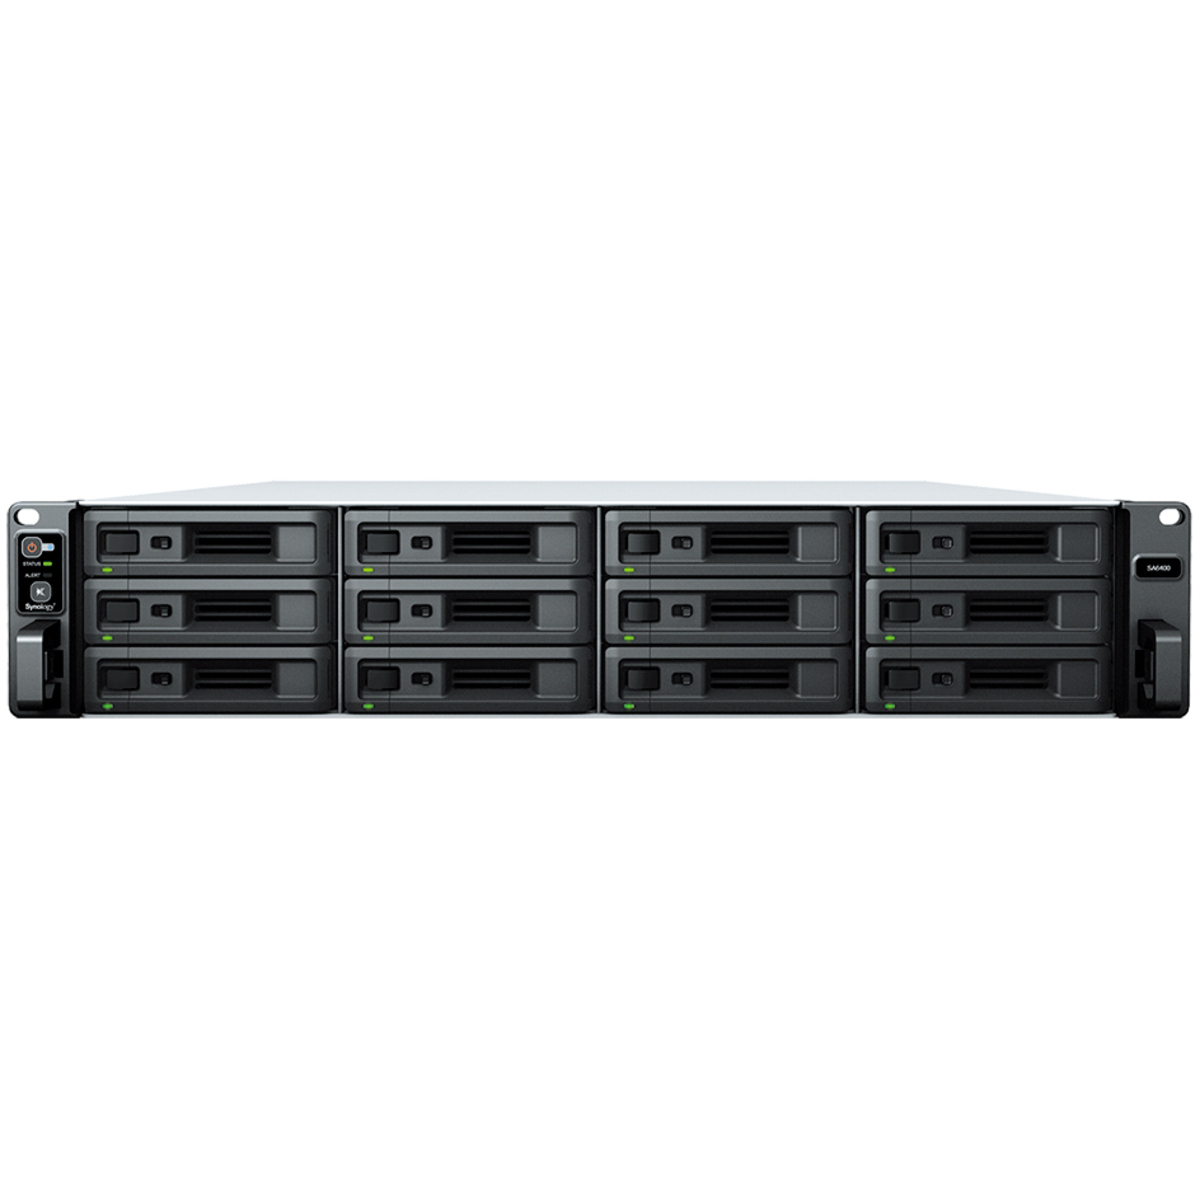 Synology RackStation SA6400 5.2tb 12-Bay RackMount Large Business / Enterprise NAS - Network Attached Storage Device 11x480gb Synology SAT5210 Series SAT5210-480G 2.5 530/500MB/s SATA 6Gb/s SSD ENTERPRISE Class Drives Installed - Burn-In Tested RackStation SA6400